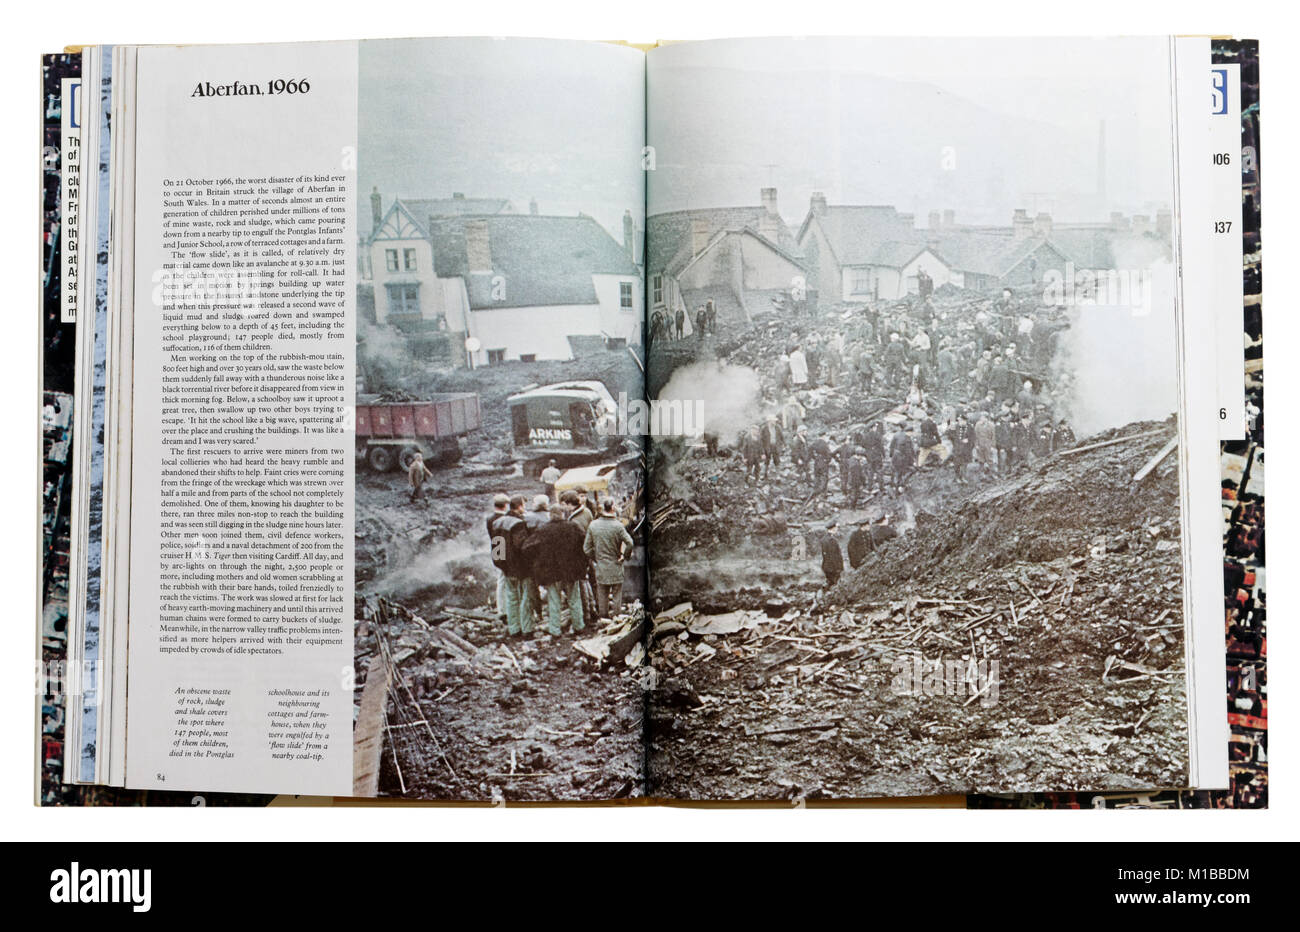 A book of disasters open to the page about the 1966 Aberfan mining disater Stock Photo